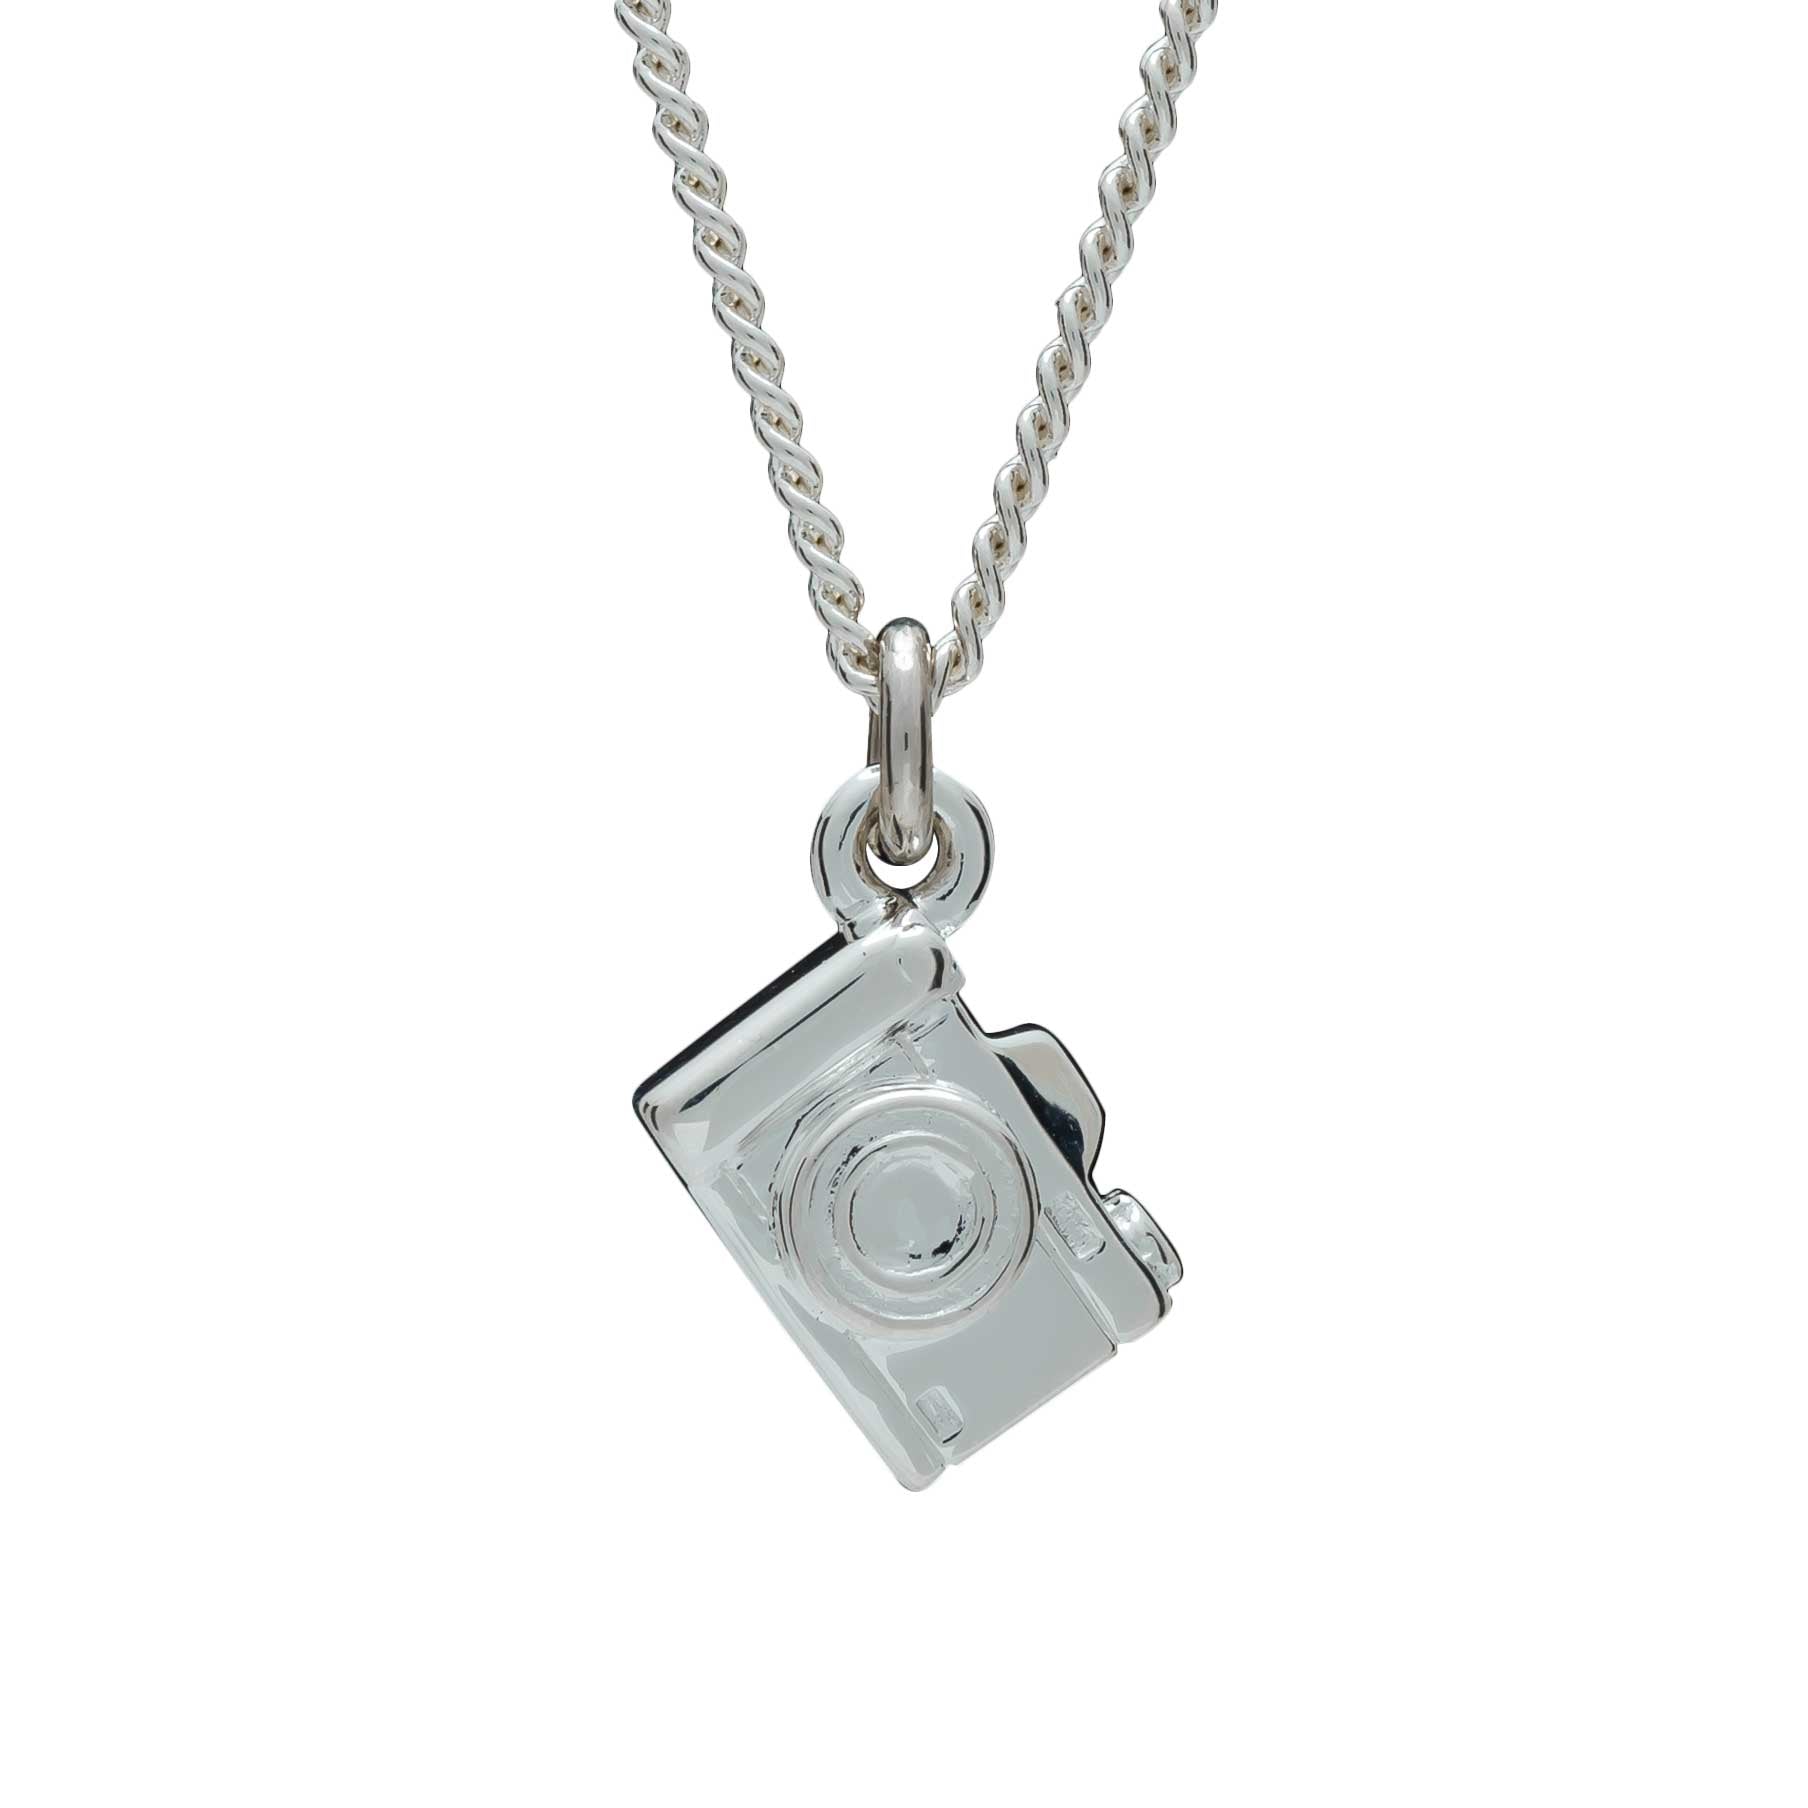 Camera Silver Necklace - Vintage SLR Camera Pendant for photographers and travellers